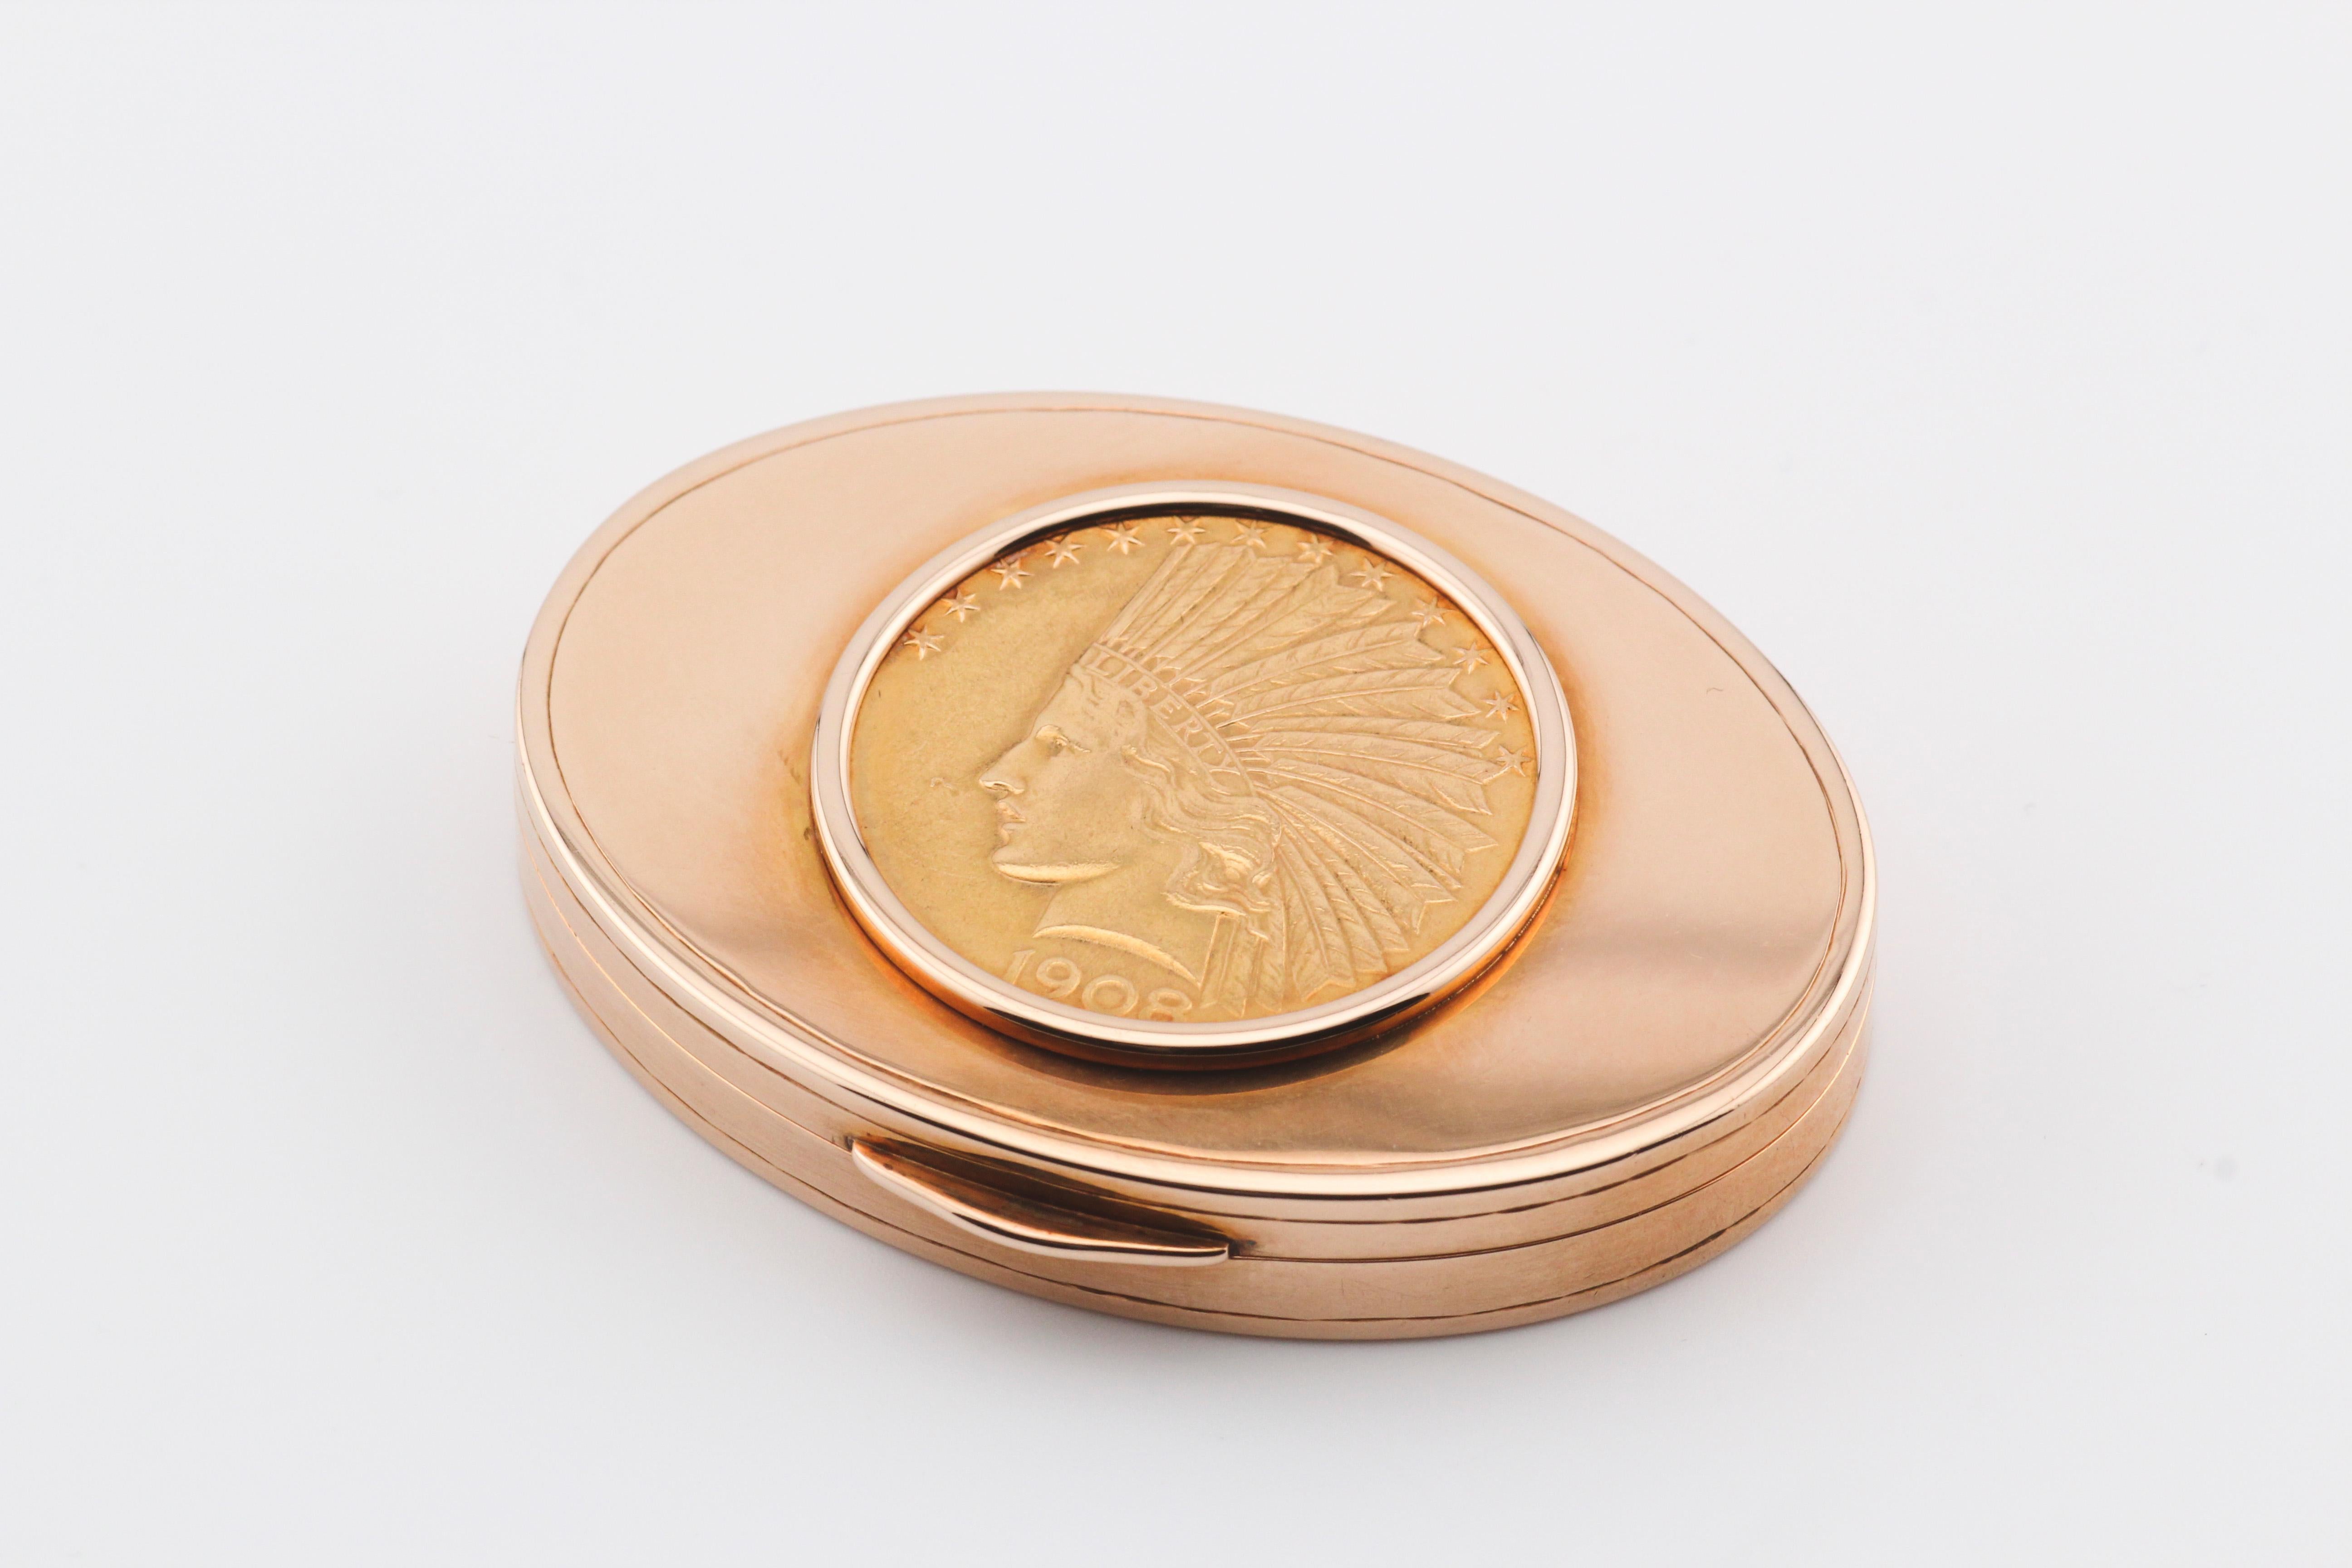 The 14K Yellow Gold Oval Pill Box with 1908 Ten Dollars USA Coin inlay is a striking and functional piece that beautifully marries luxury and history. Crafted with meticulous attention to detail, this pill box is a testament to fine craftsmanship